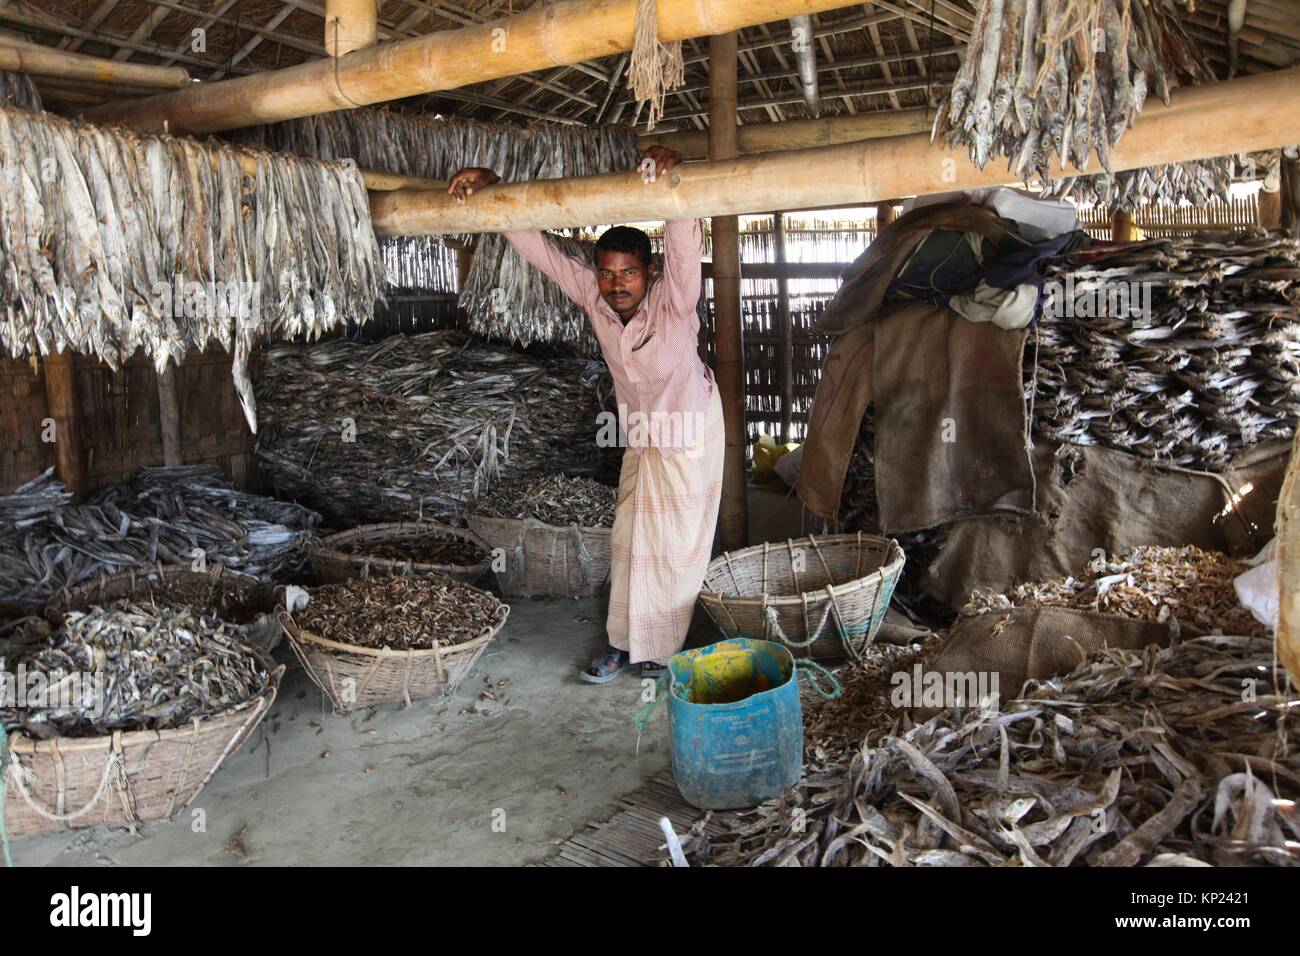 Cox's Bazar, Bangladesh. Dried-fish production has got a huge thrust as the winter is approaching in the region as well as the whole country. Stock Photo